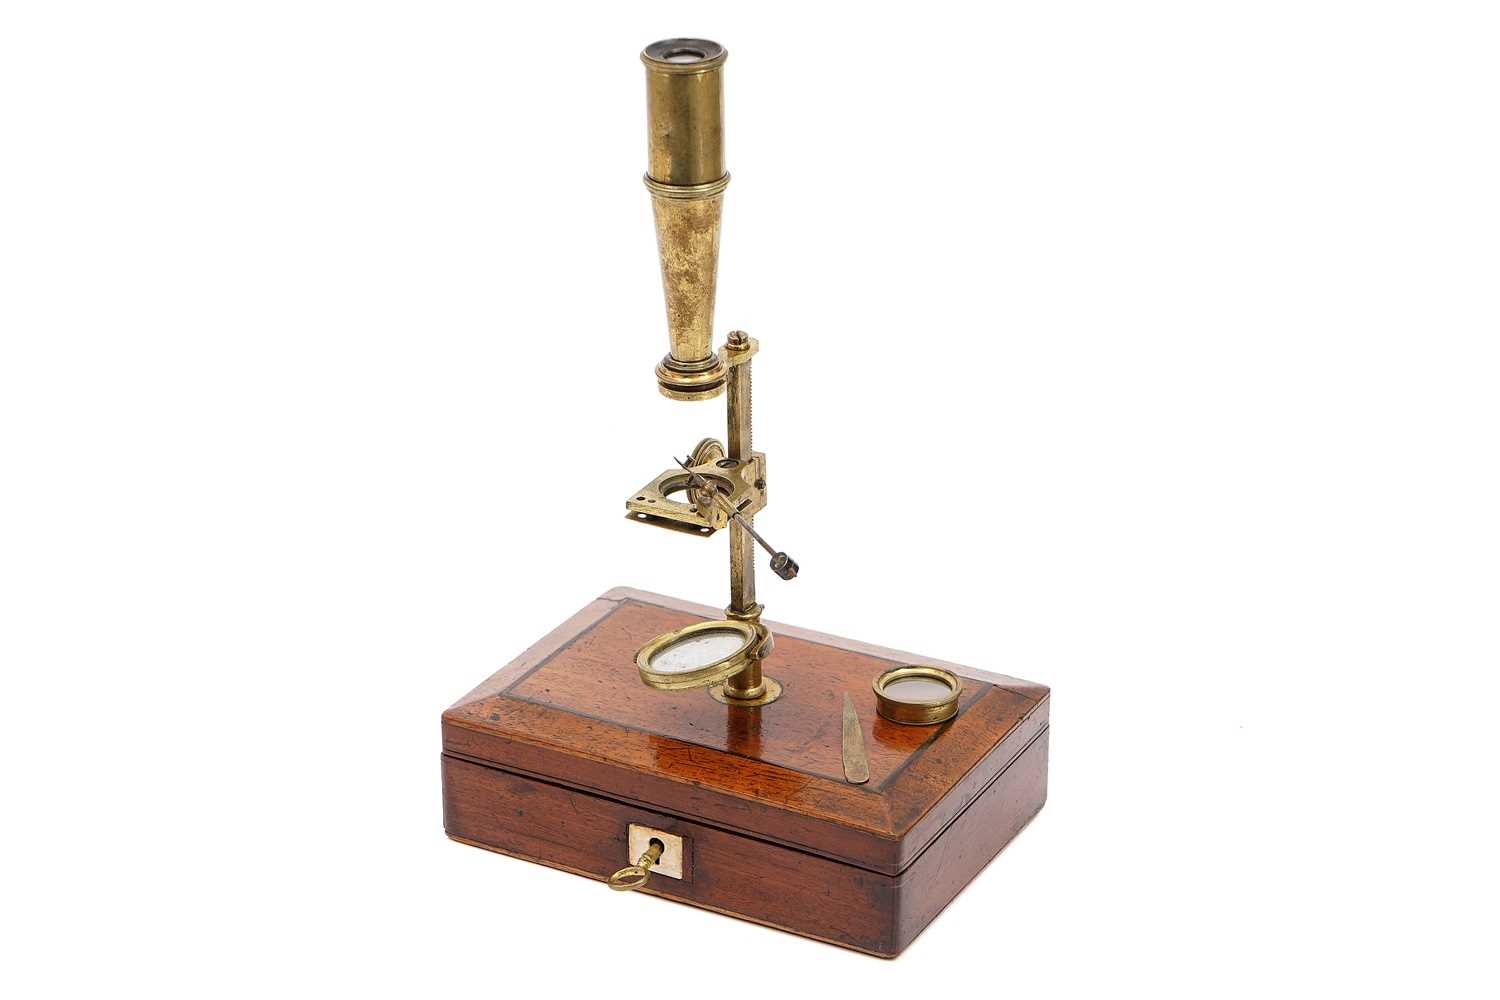 Lot 25 - A Gould-Type Microscope by Youle